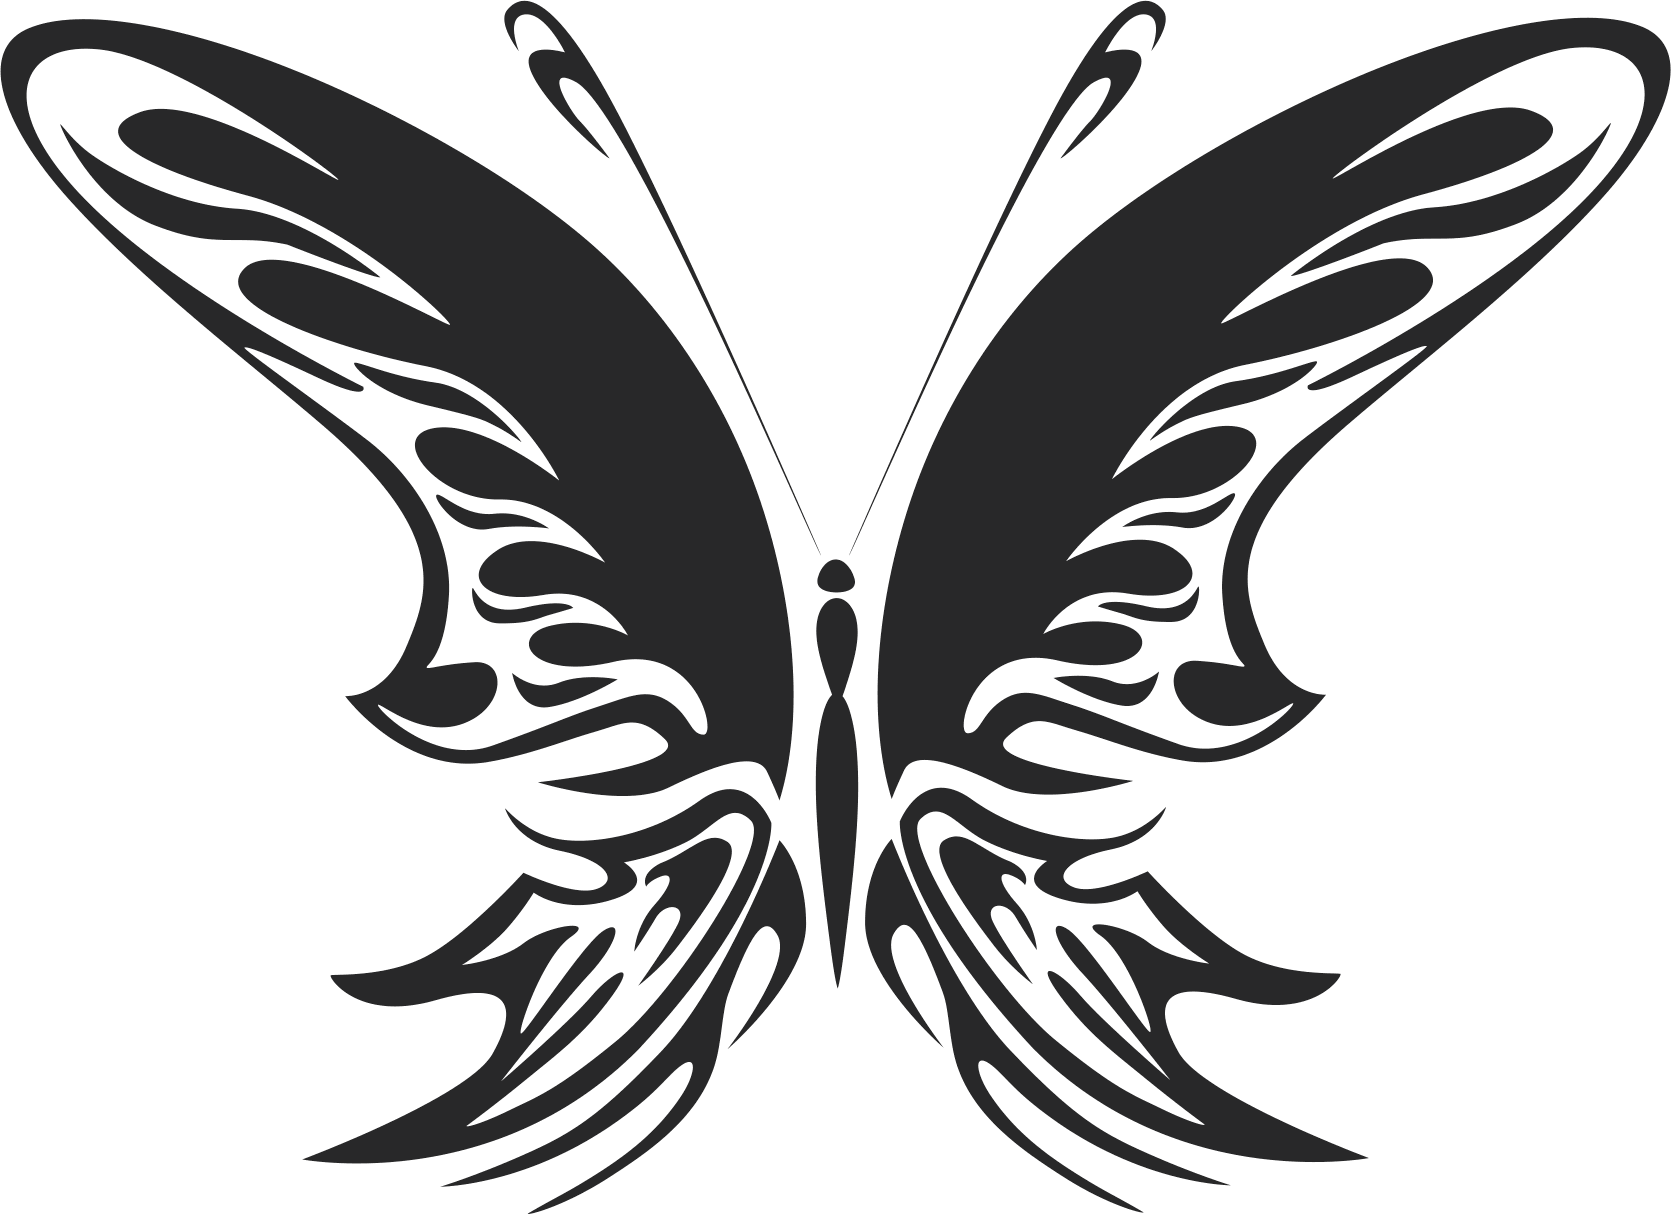 Butterfly Silhouette Design Free CDR Vectors Art